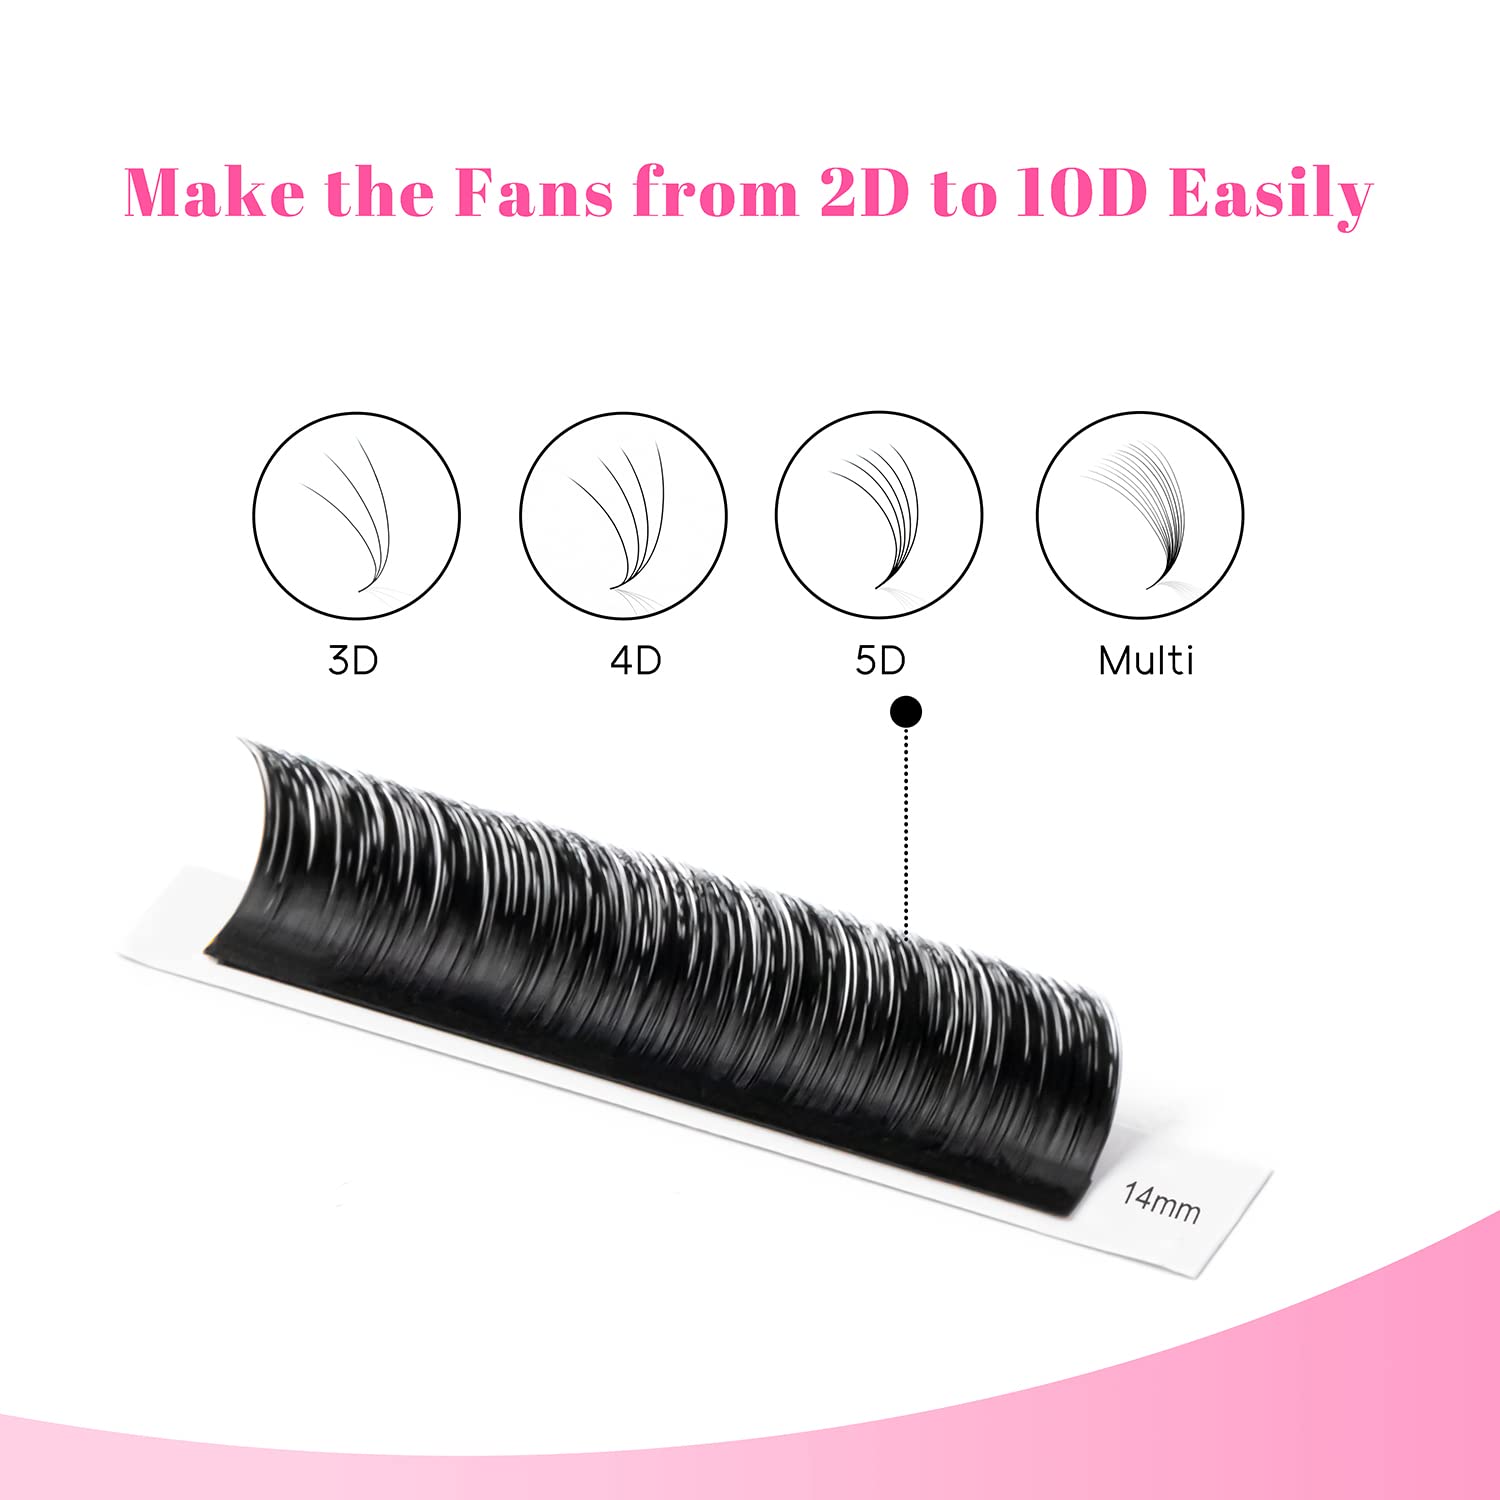 TDANCE Eyelash Extension Supplies Rapid Blooming Volume Eyelash Extensions Thickness 0.03 CC Curl Mix 14-19mm Easy Fan Volume Lashes Self Fanning Individual Eyelashes Extension (CC-0.03,14-19mm)